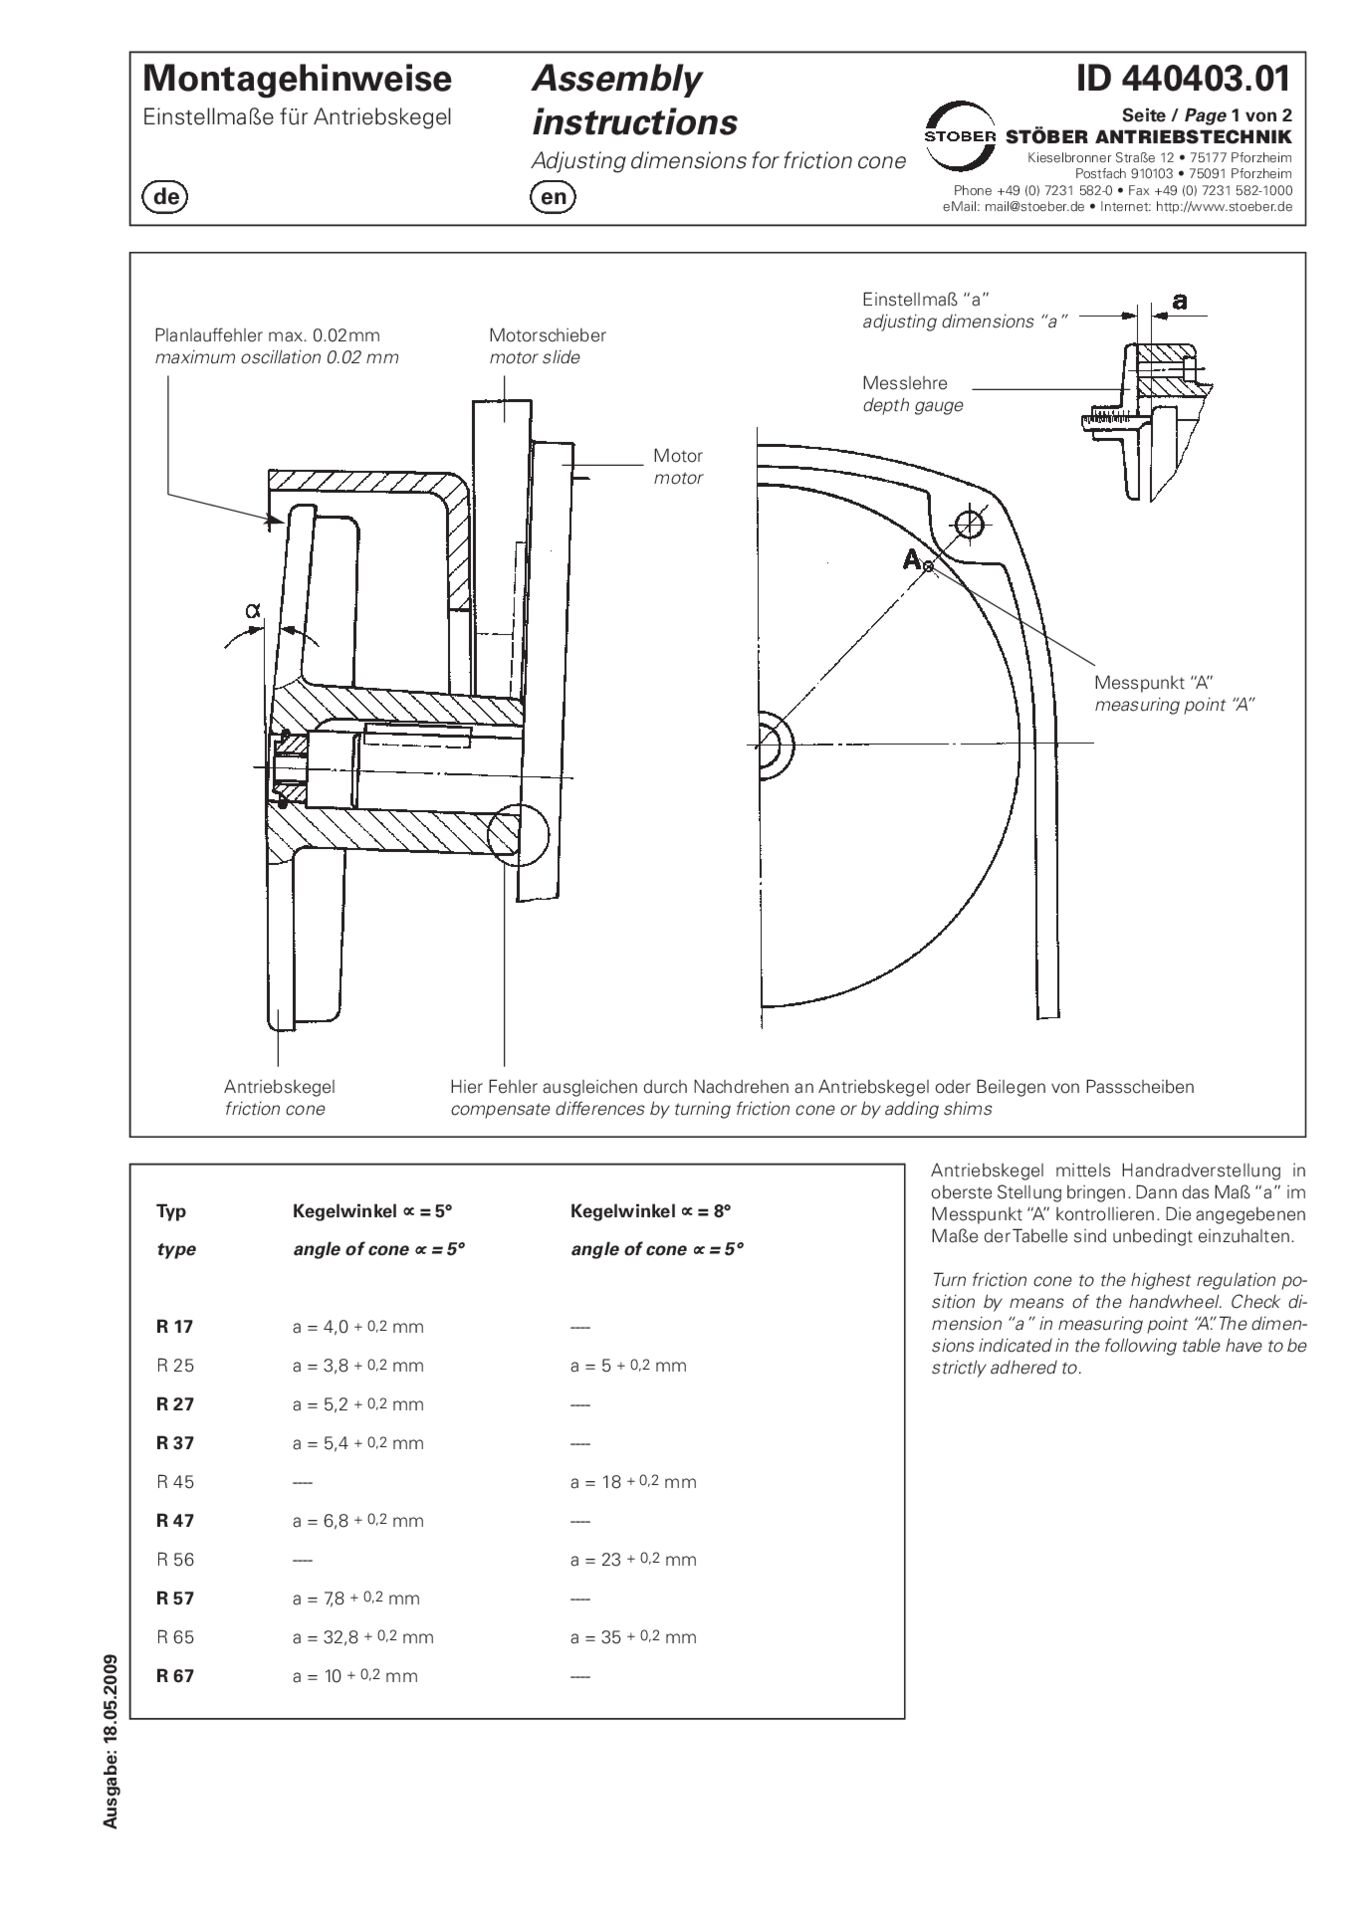 Assembly instructions Adjusting dimensions for friction cone R